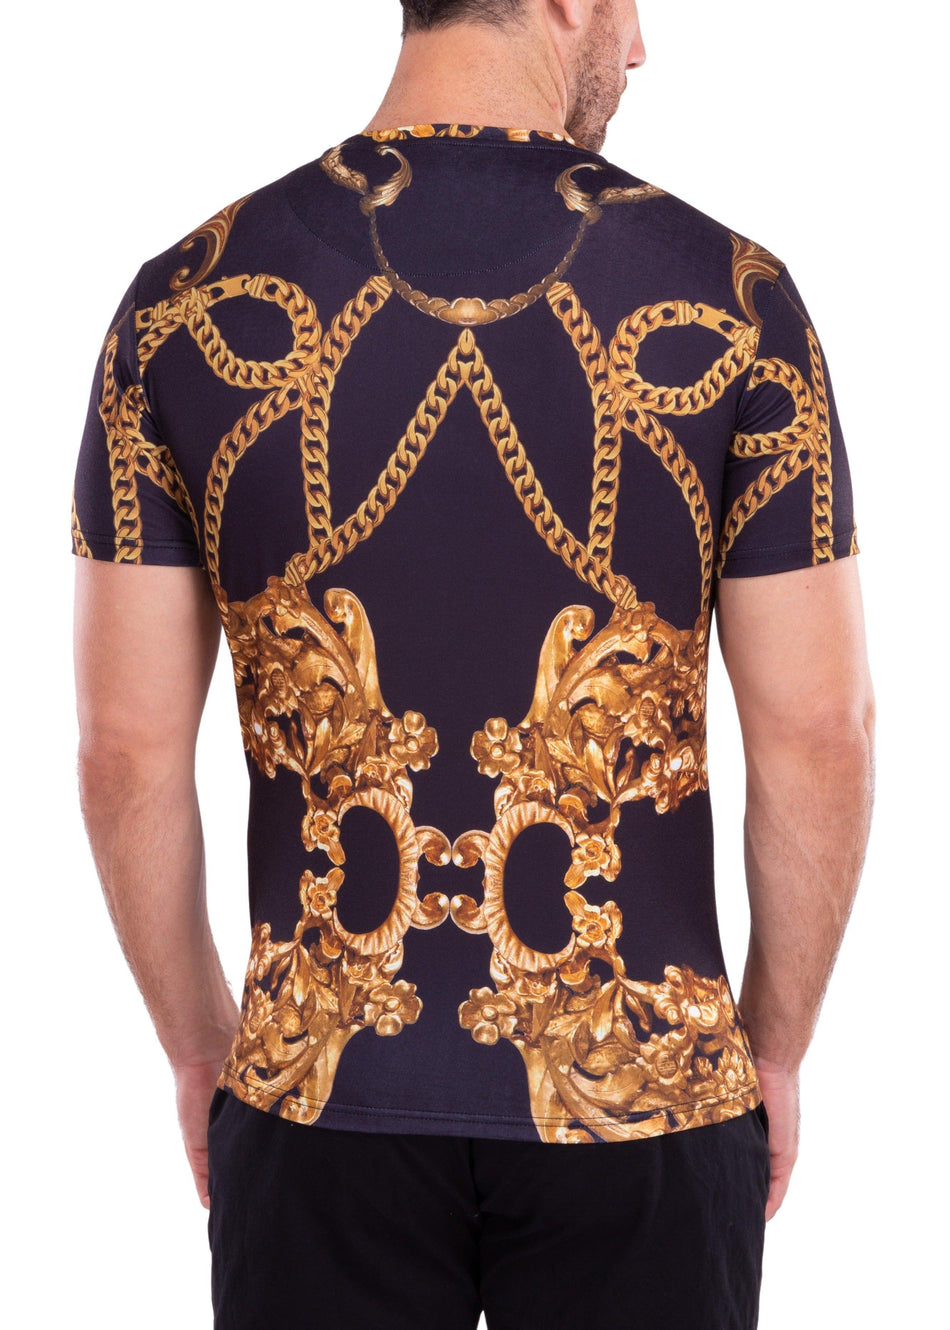 Mirrored Gold Chains Bold Printed All-Over Graphic Tee Black